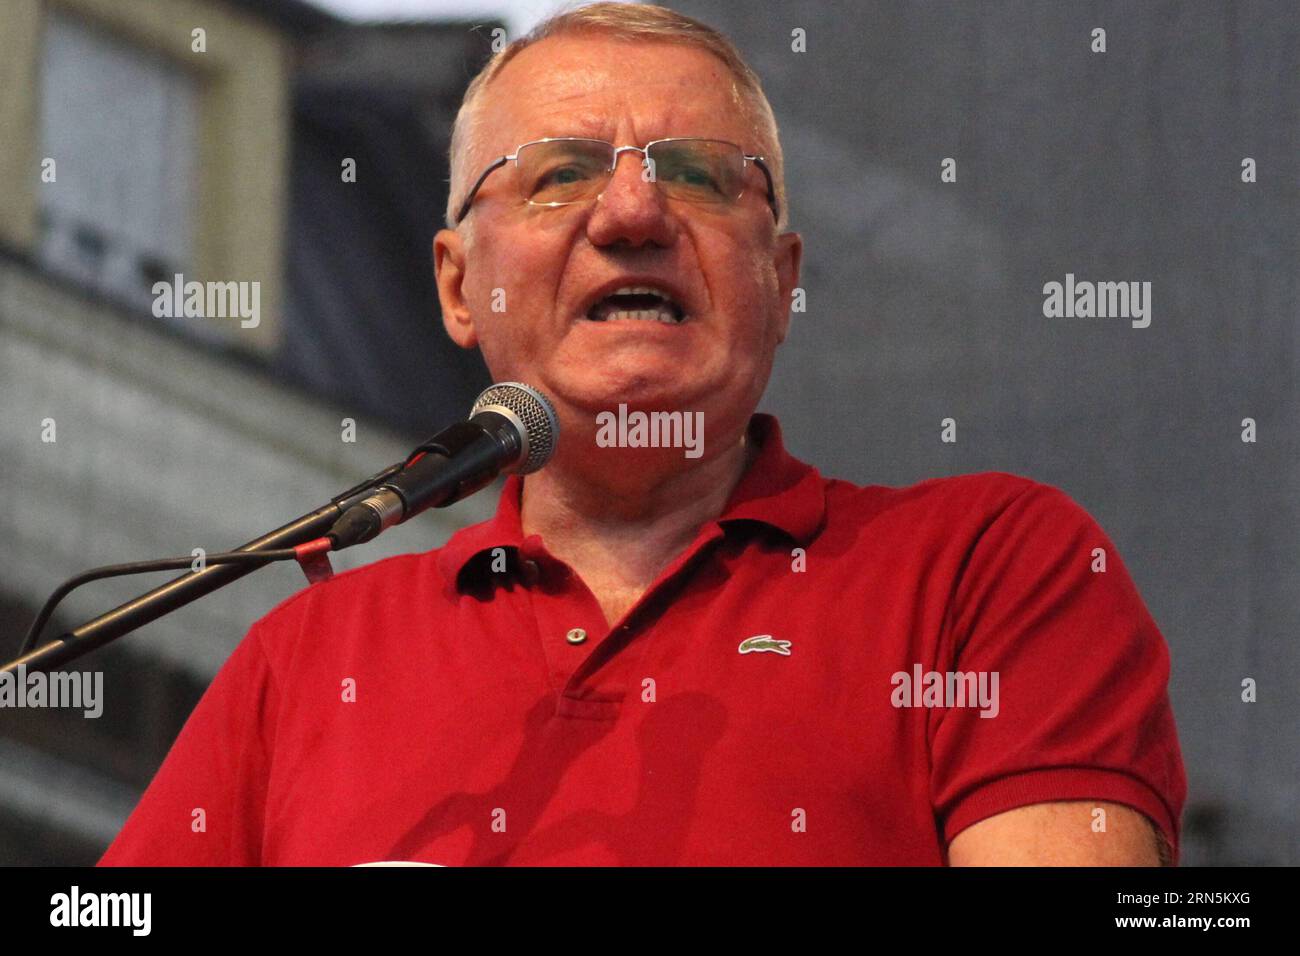 Vojislav Seselj, leader of Serbian Radical Party, addresses supporters at the Republic Square in Belgrade, Serbia, on June 28, 2015. Vojislav Seselj, 60-year-old, who was previous released due to serious health issues from the prison in Sheveningen, Holland, where he was sentenced to serve for war crime by the International Criminal Court in Hague, expressed his intention to continue his political career during the rally on Sunday. ) SERBIA-BELGRADE-RADICAL PARTY-VOJISLAV SESELJ NemanjaxCabric PUBLICATIONxNOTxINxCHN   Vojislav Seselj Leader of Serbian Radical Party addresses Supporters AT The Stock Photo